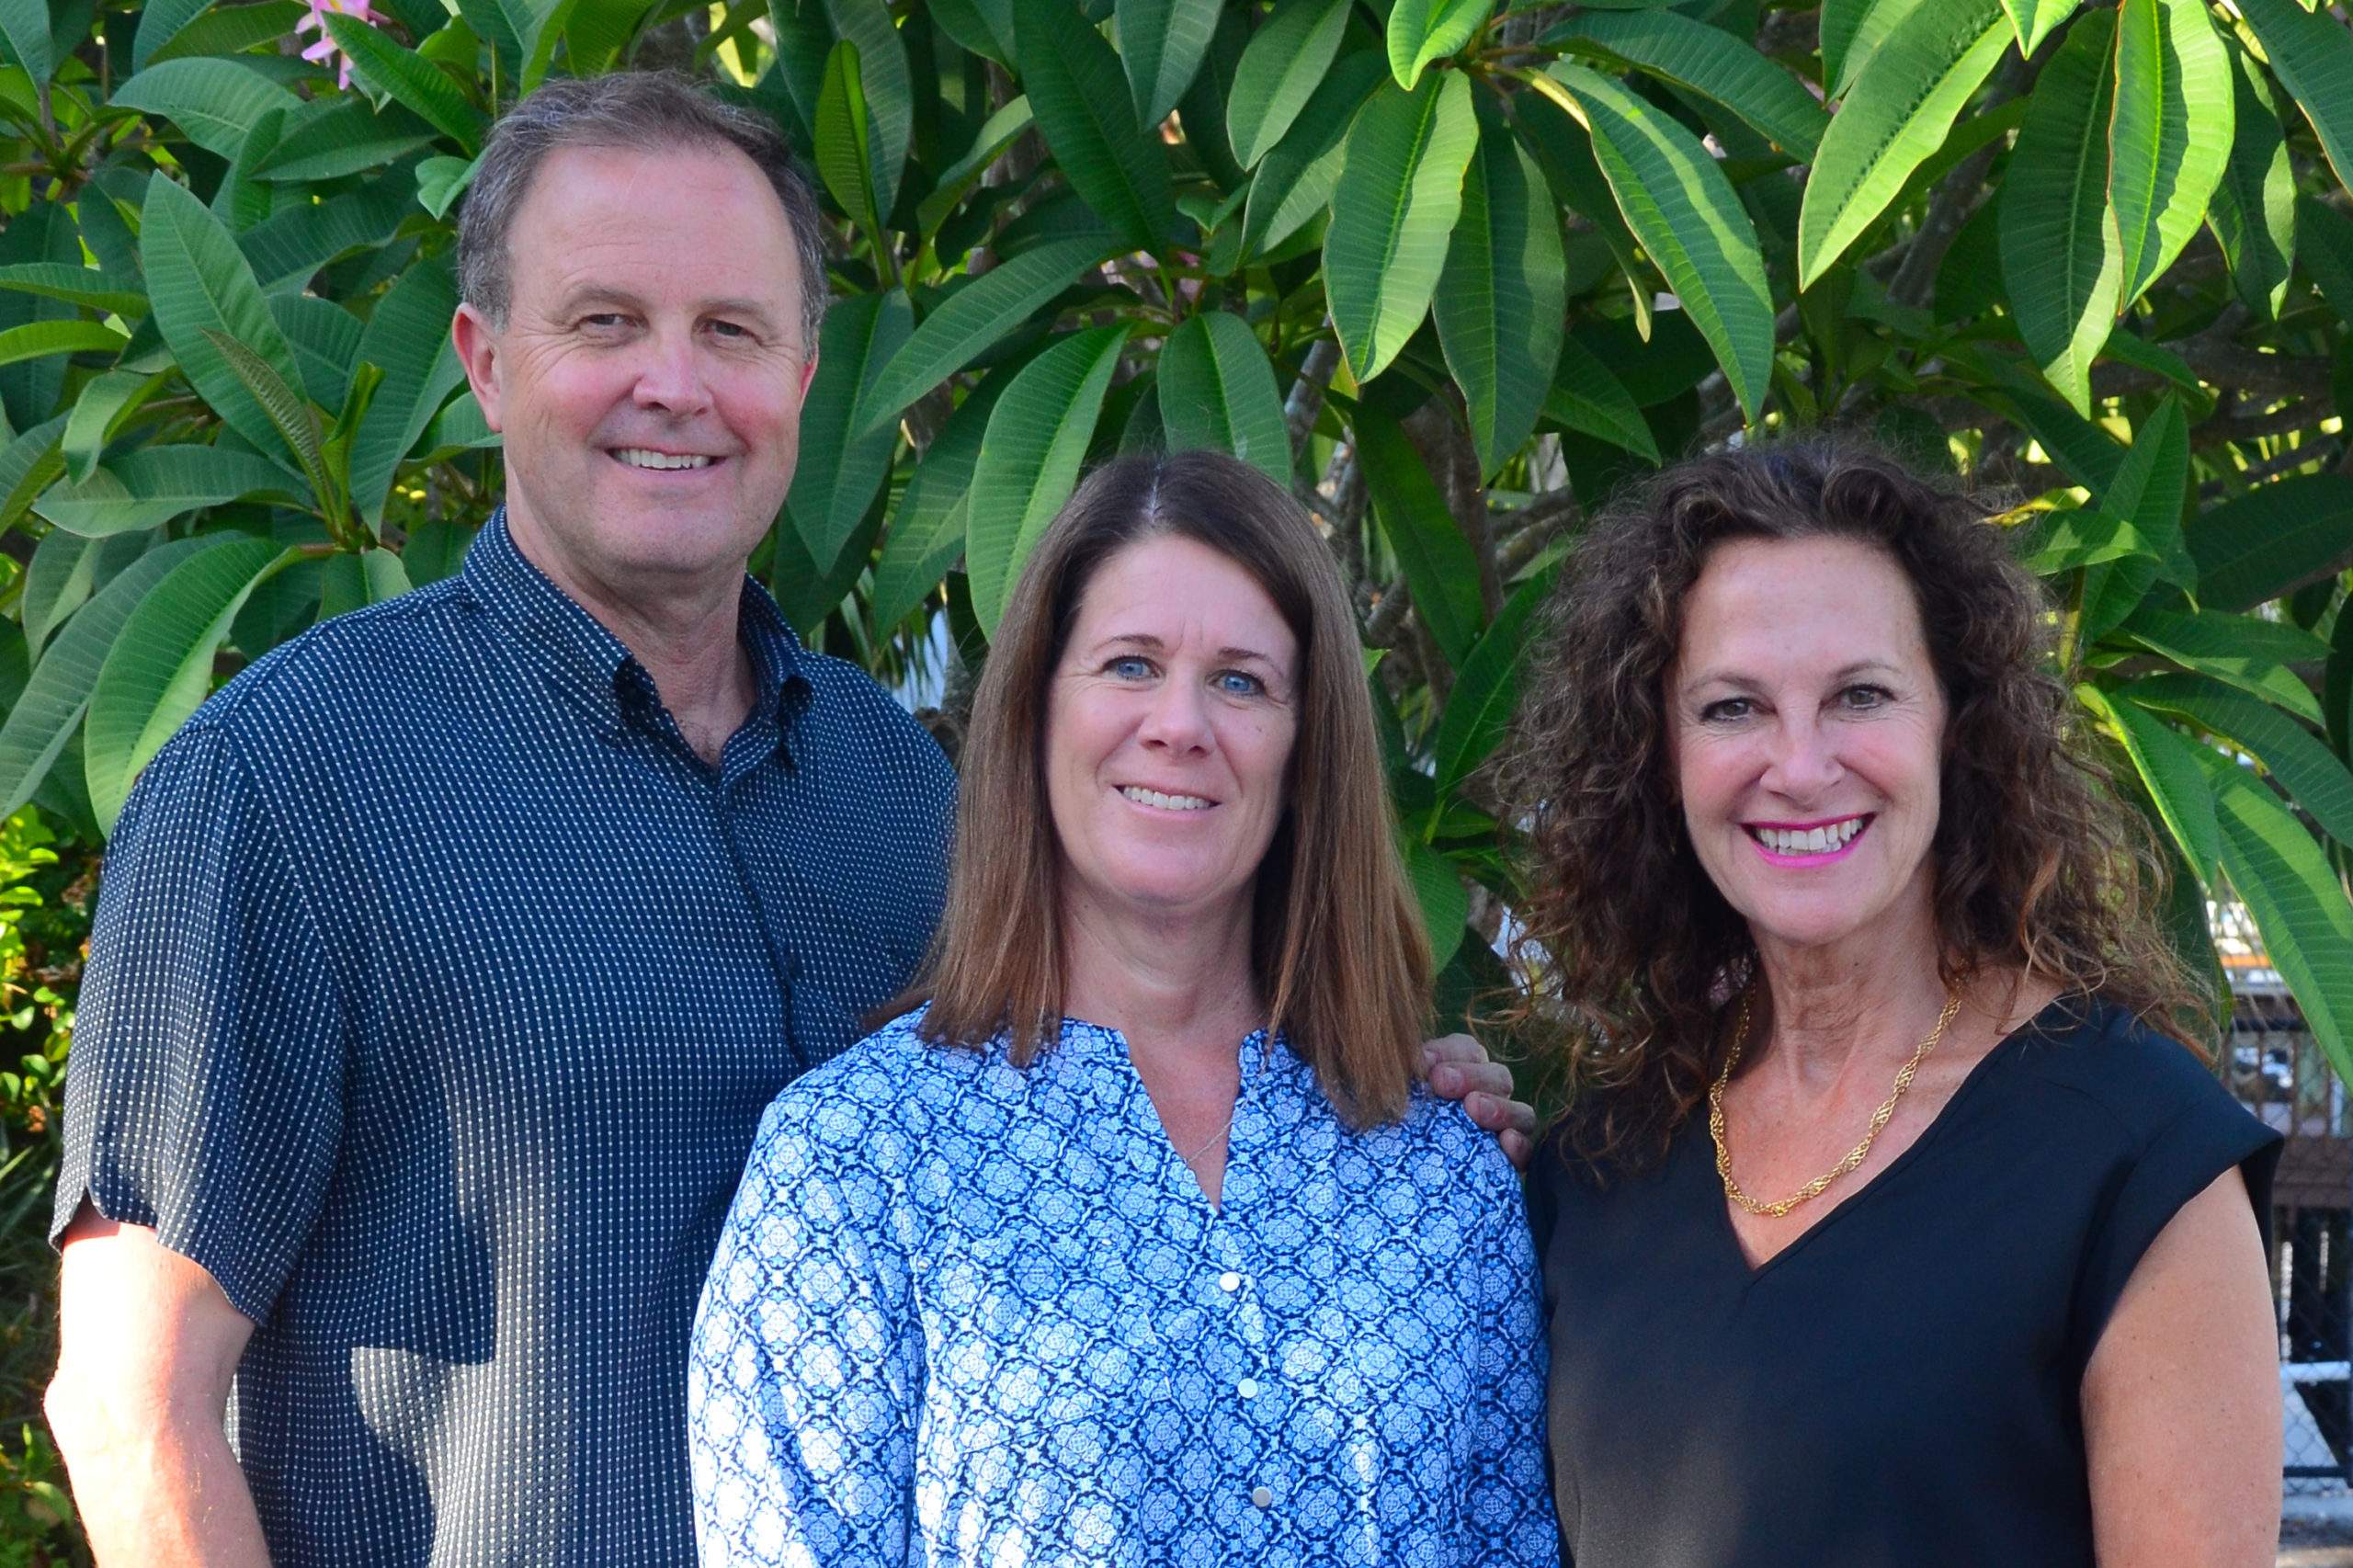 Rich Kase, Michelle Kase and Janice Bayruns, owners at FirstLight Home Care of South Tampa